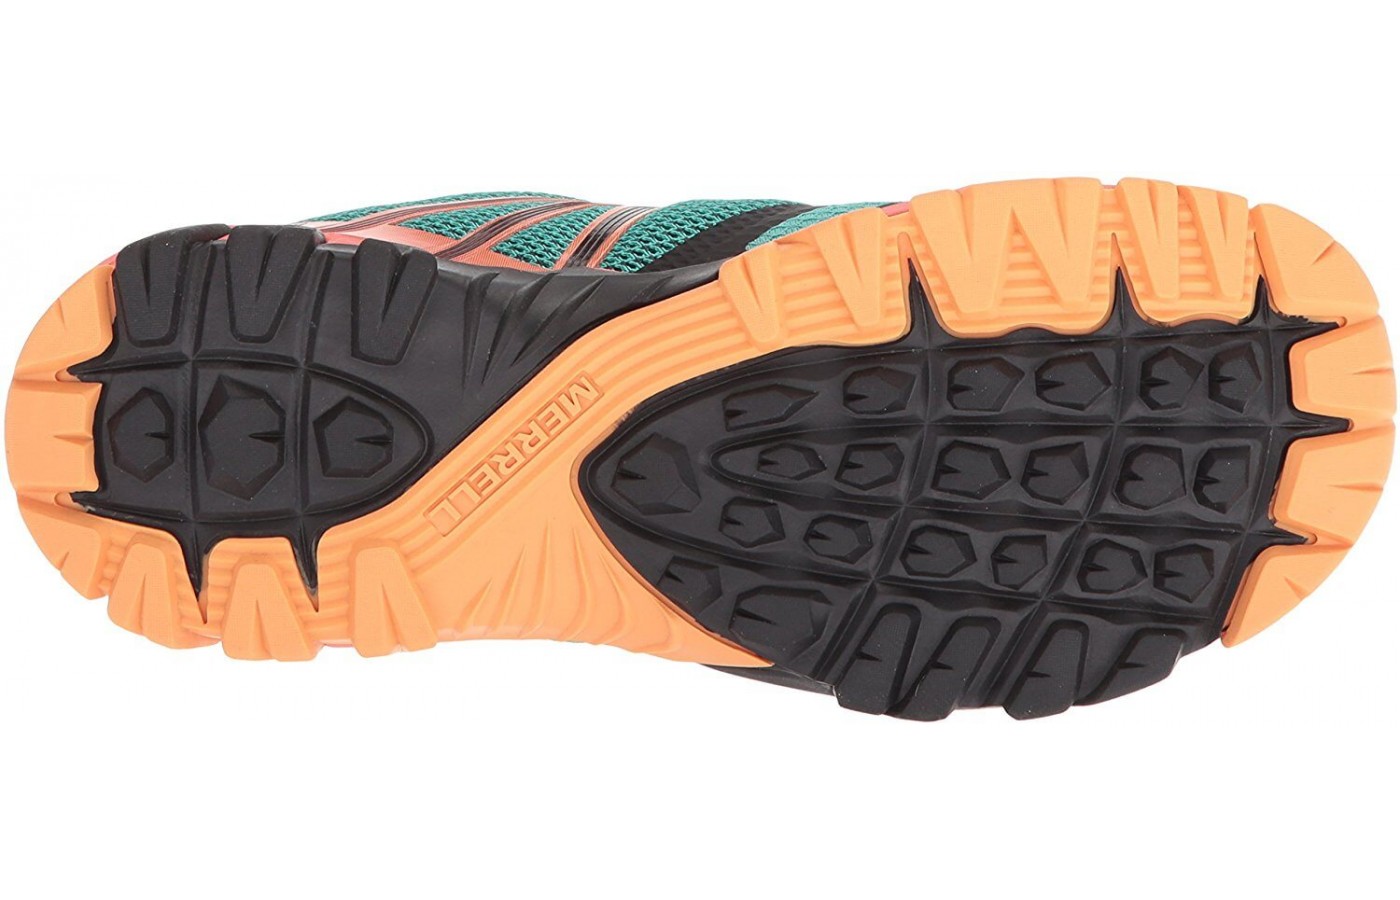 The outsole features 3.5 mm deep lugs 